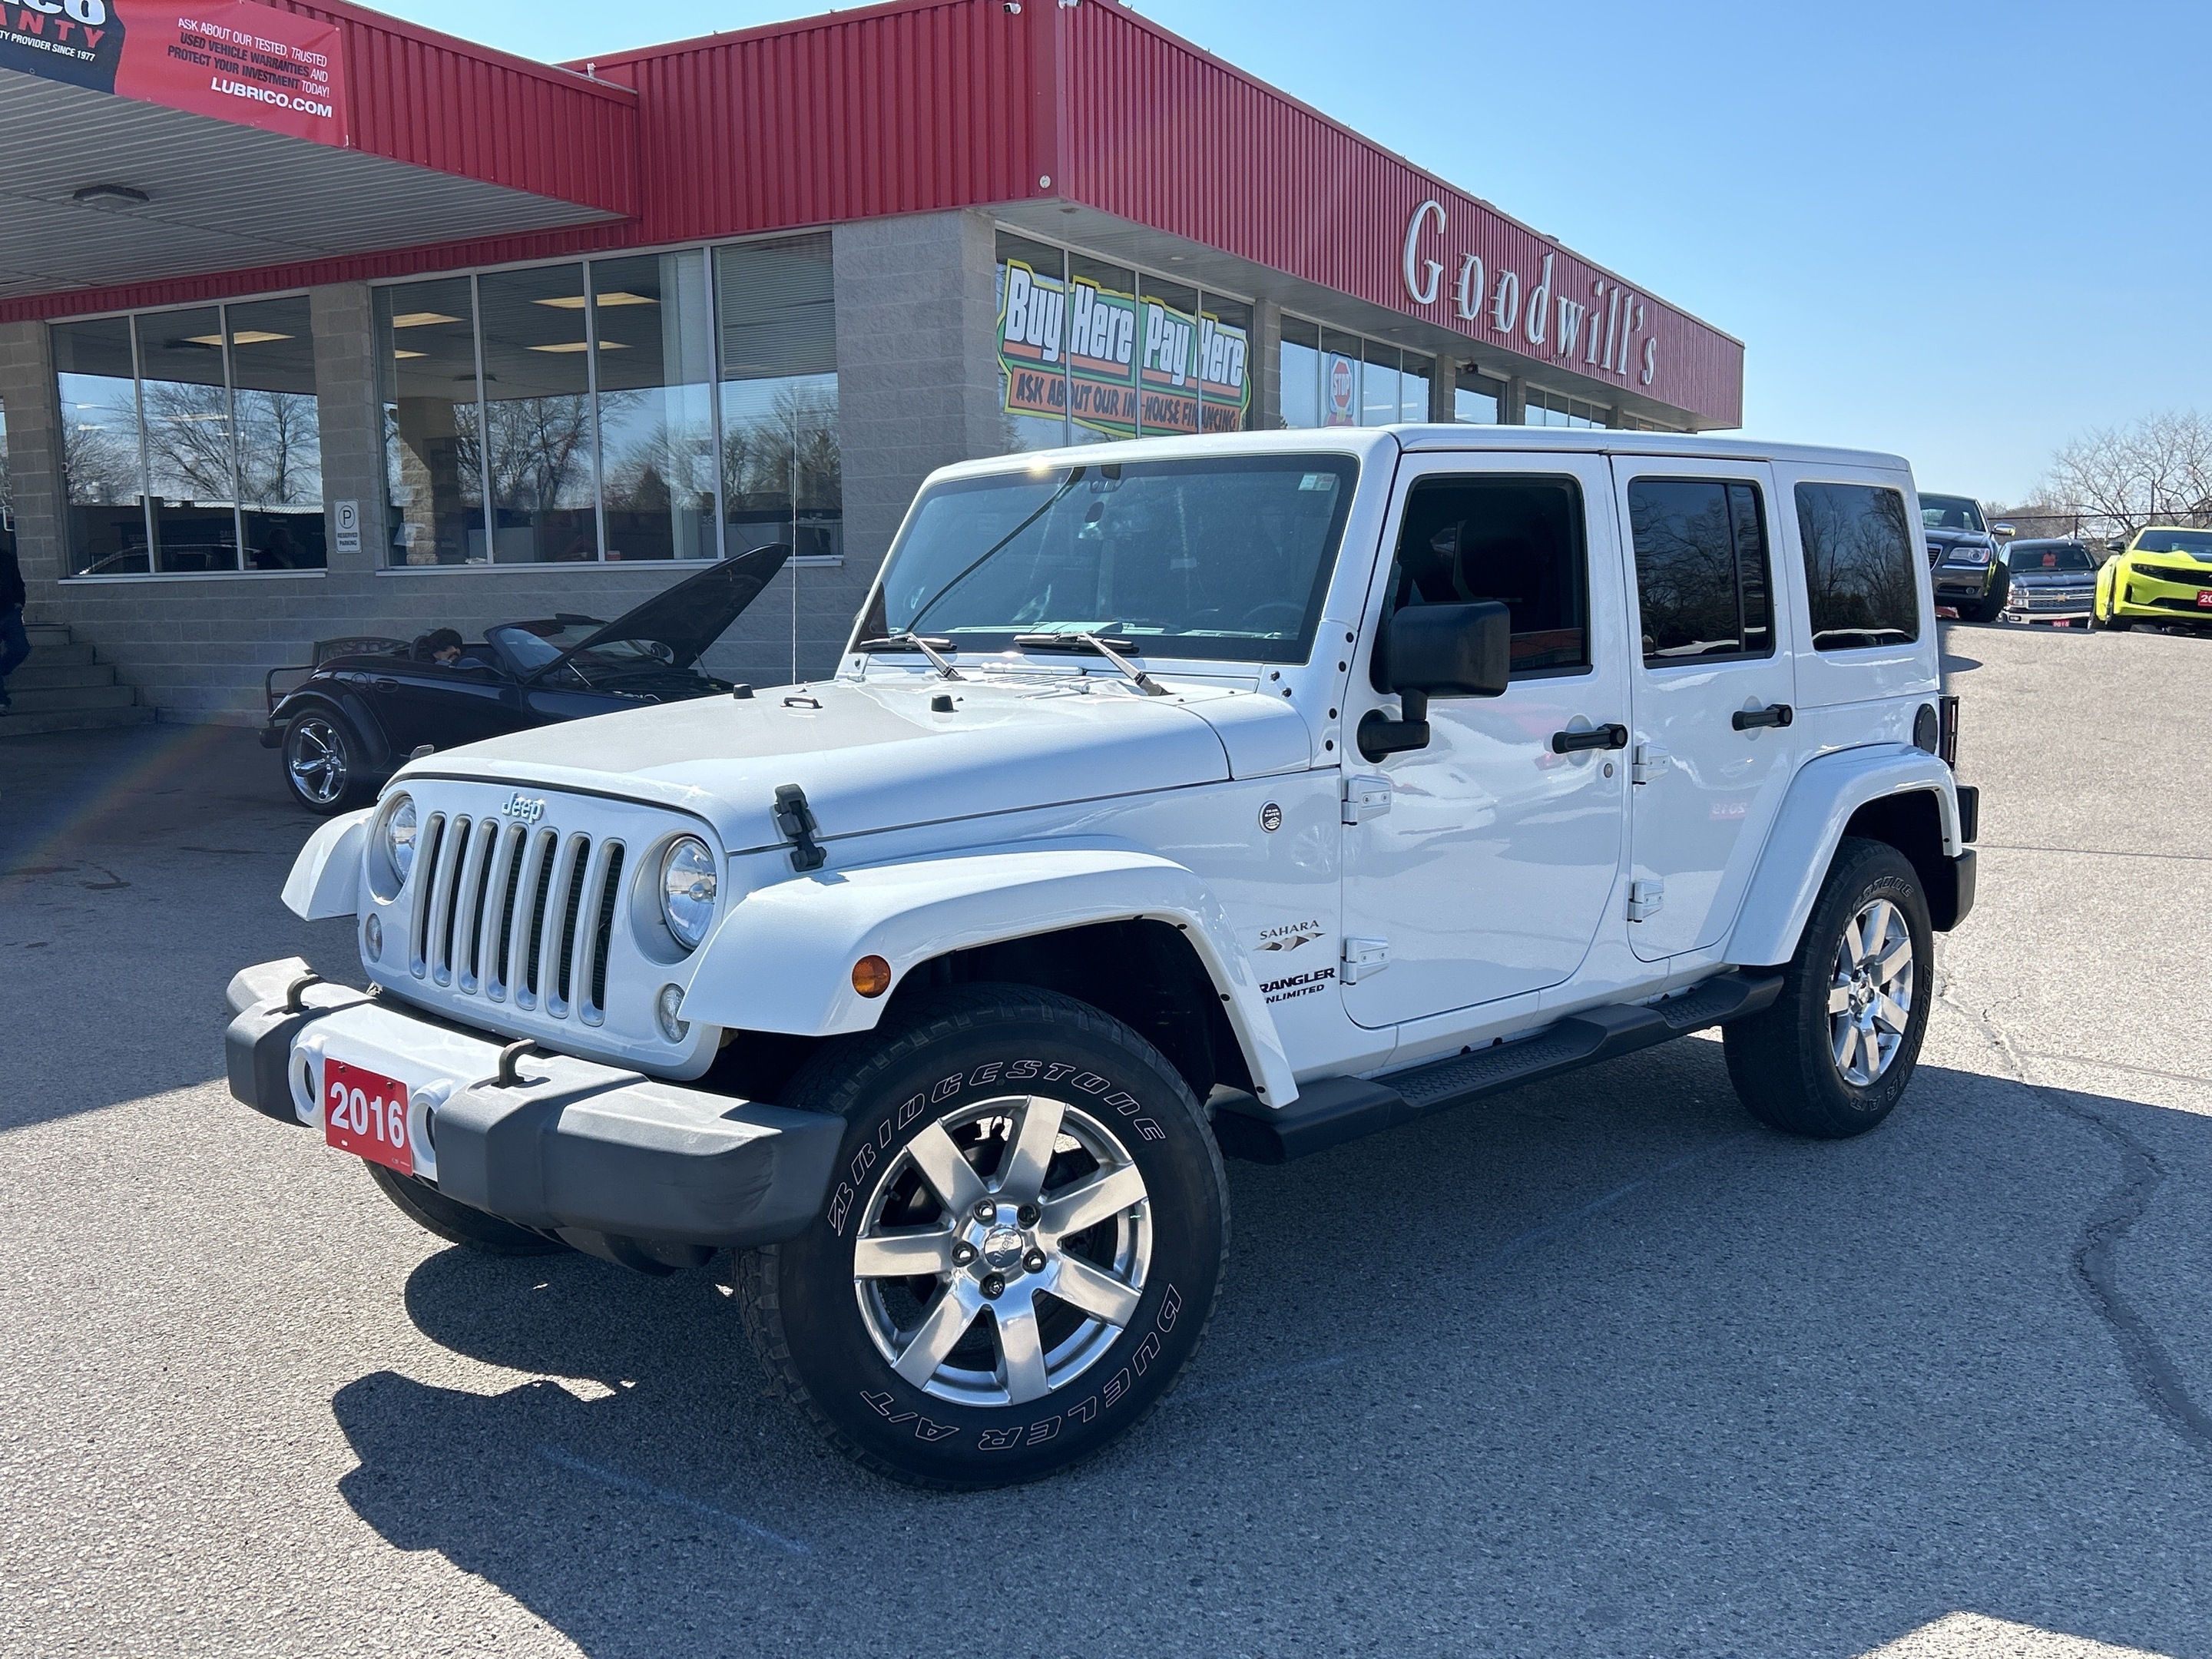 2016 Jeep WRANGLER UNLIMITED SAHARA, INCLUDES SOFT TOP, REMOTE START!